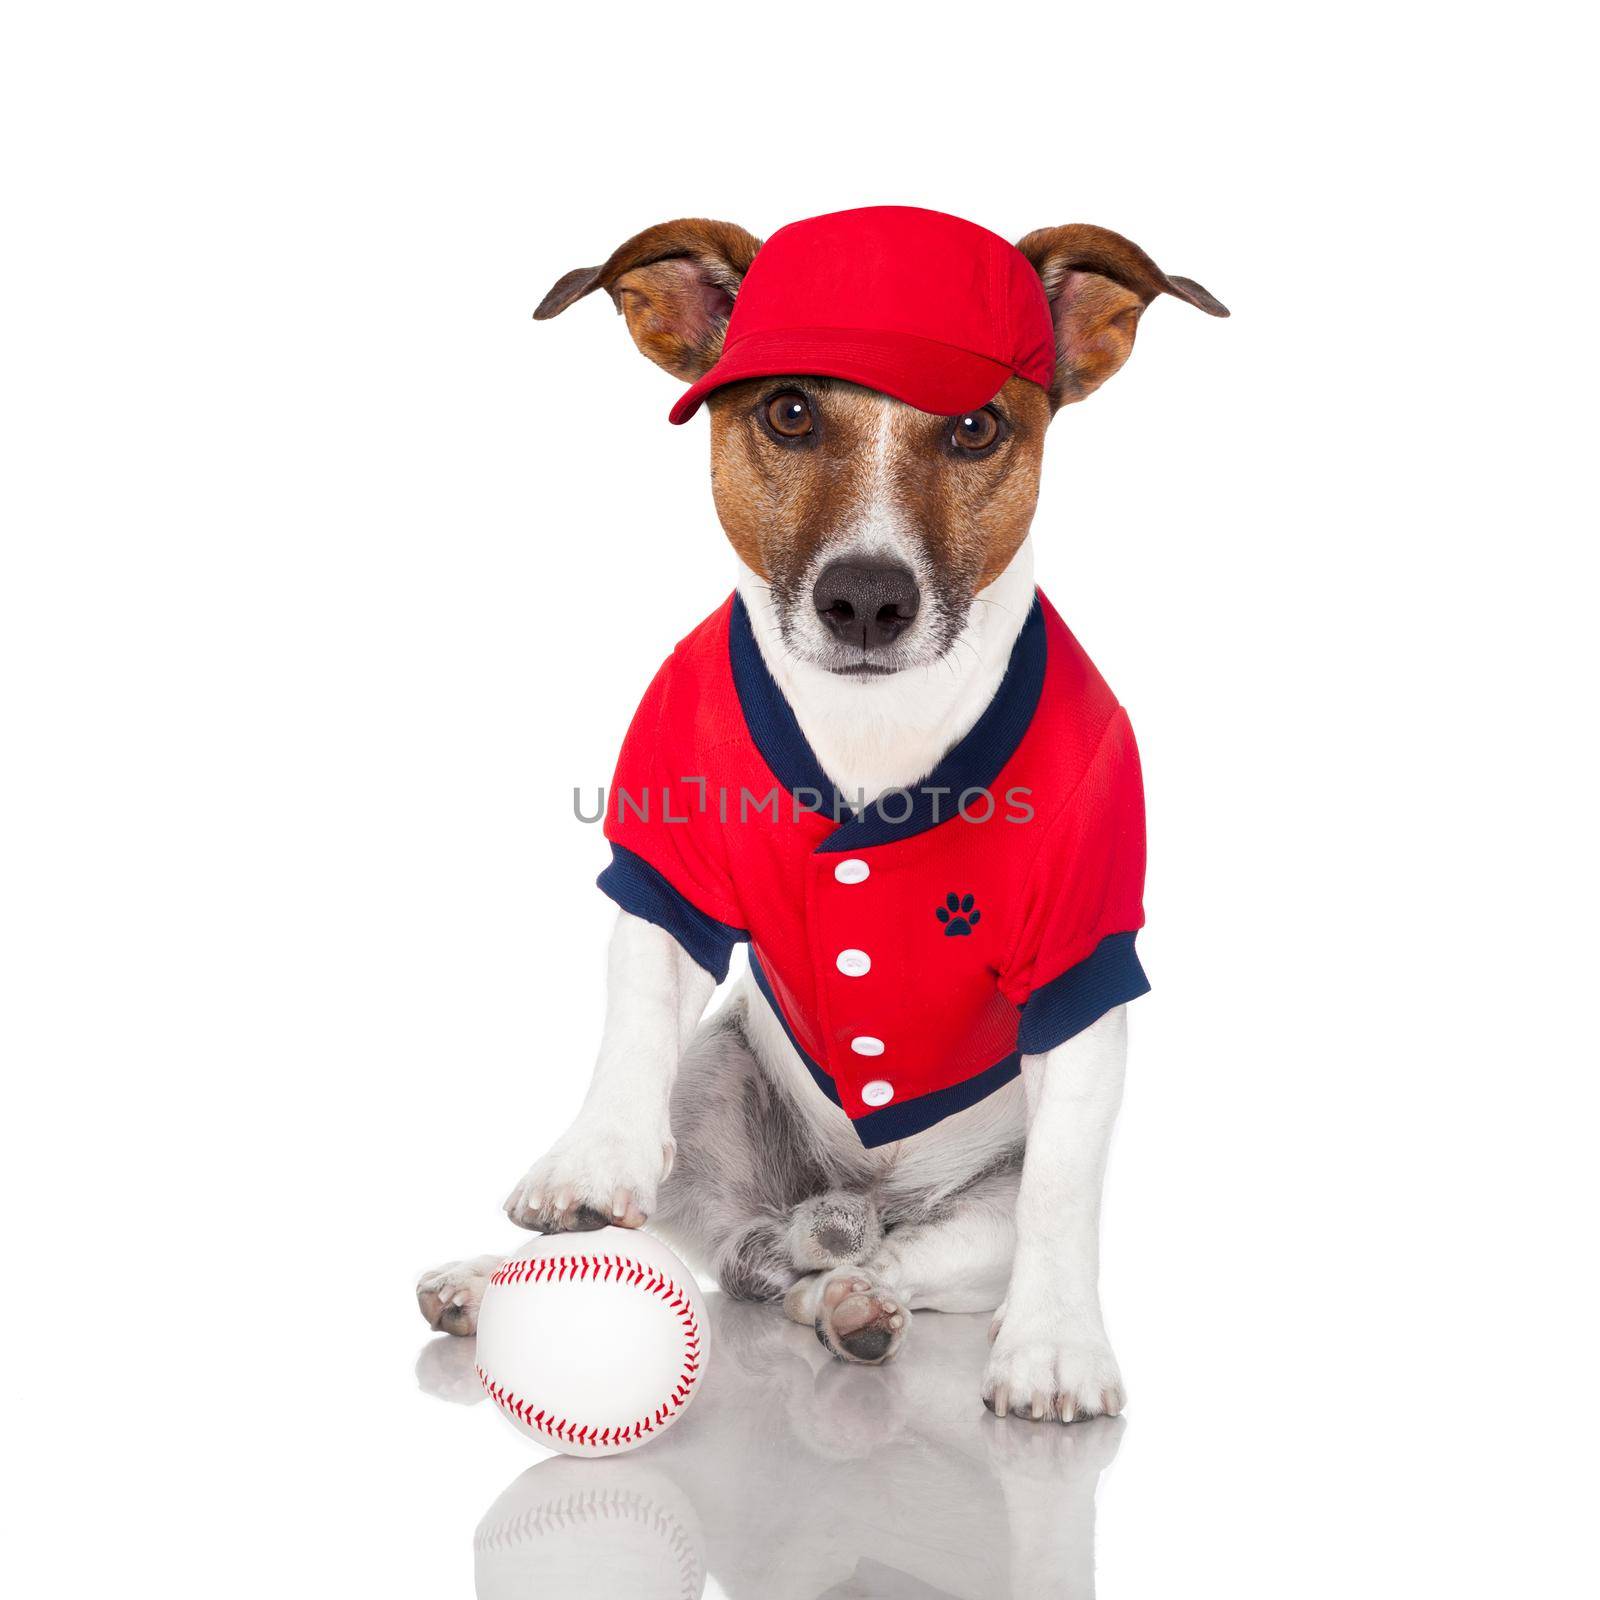 baseball dog with a baseball and a red cap